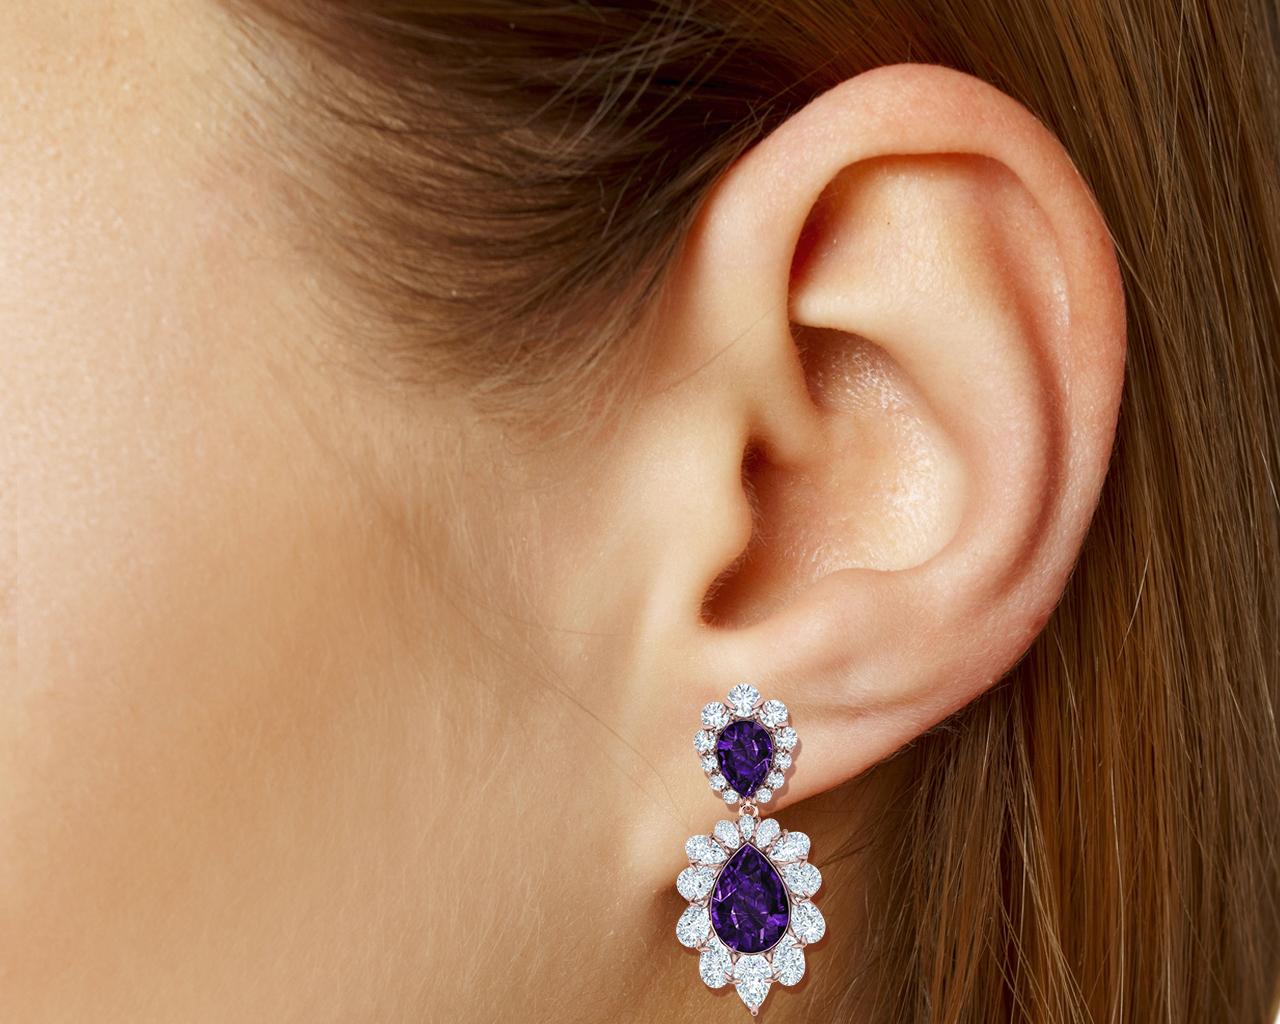 Have you eve looked through older magazines or jewelry books and see jewelry that just made in a different way to anything you see today?  This pair of  earrings breaks that mold.  Here are bespoke made Amethyst and Diamond earrings crafted from 18k